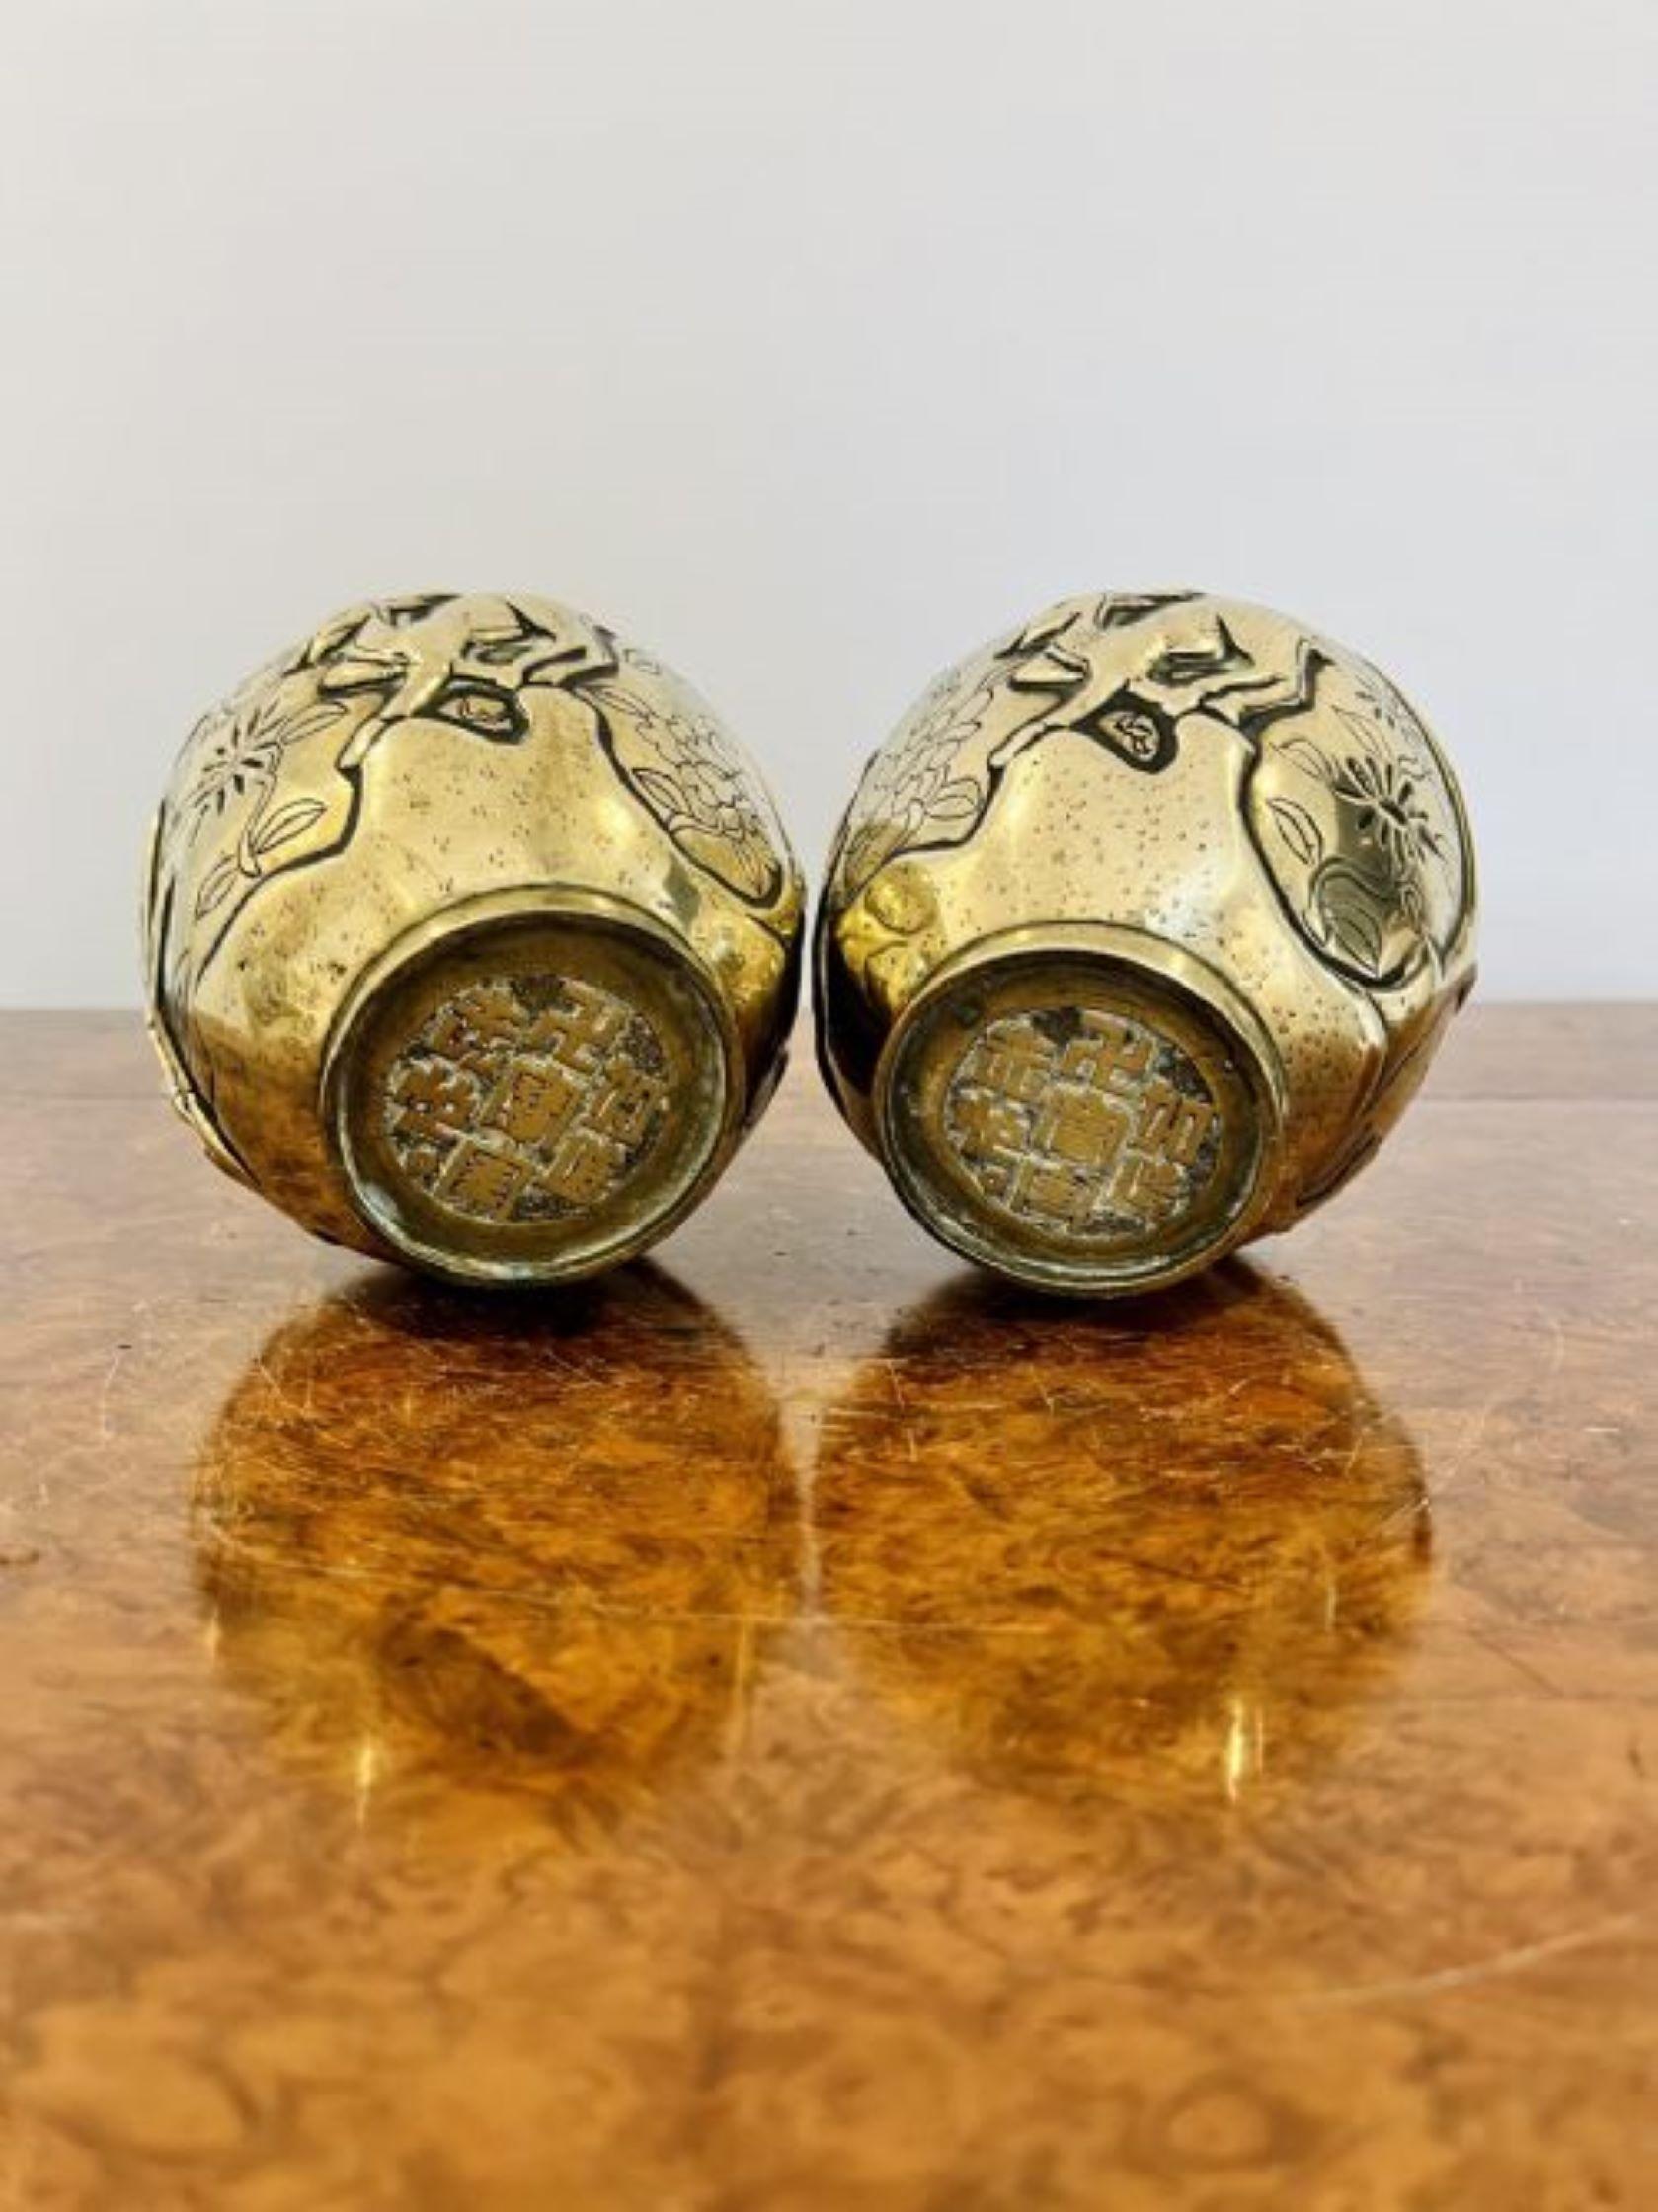 Unusual pair of antique Chinese brass jardinieres with wonderful engraved decoration 